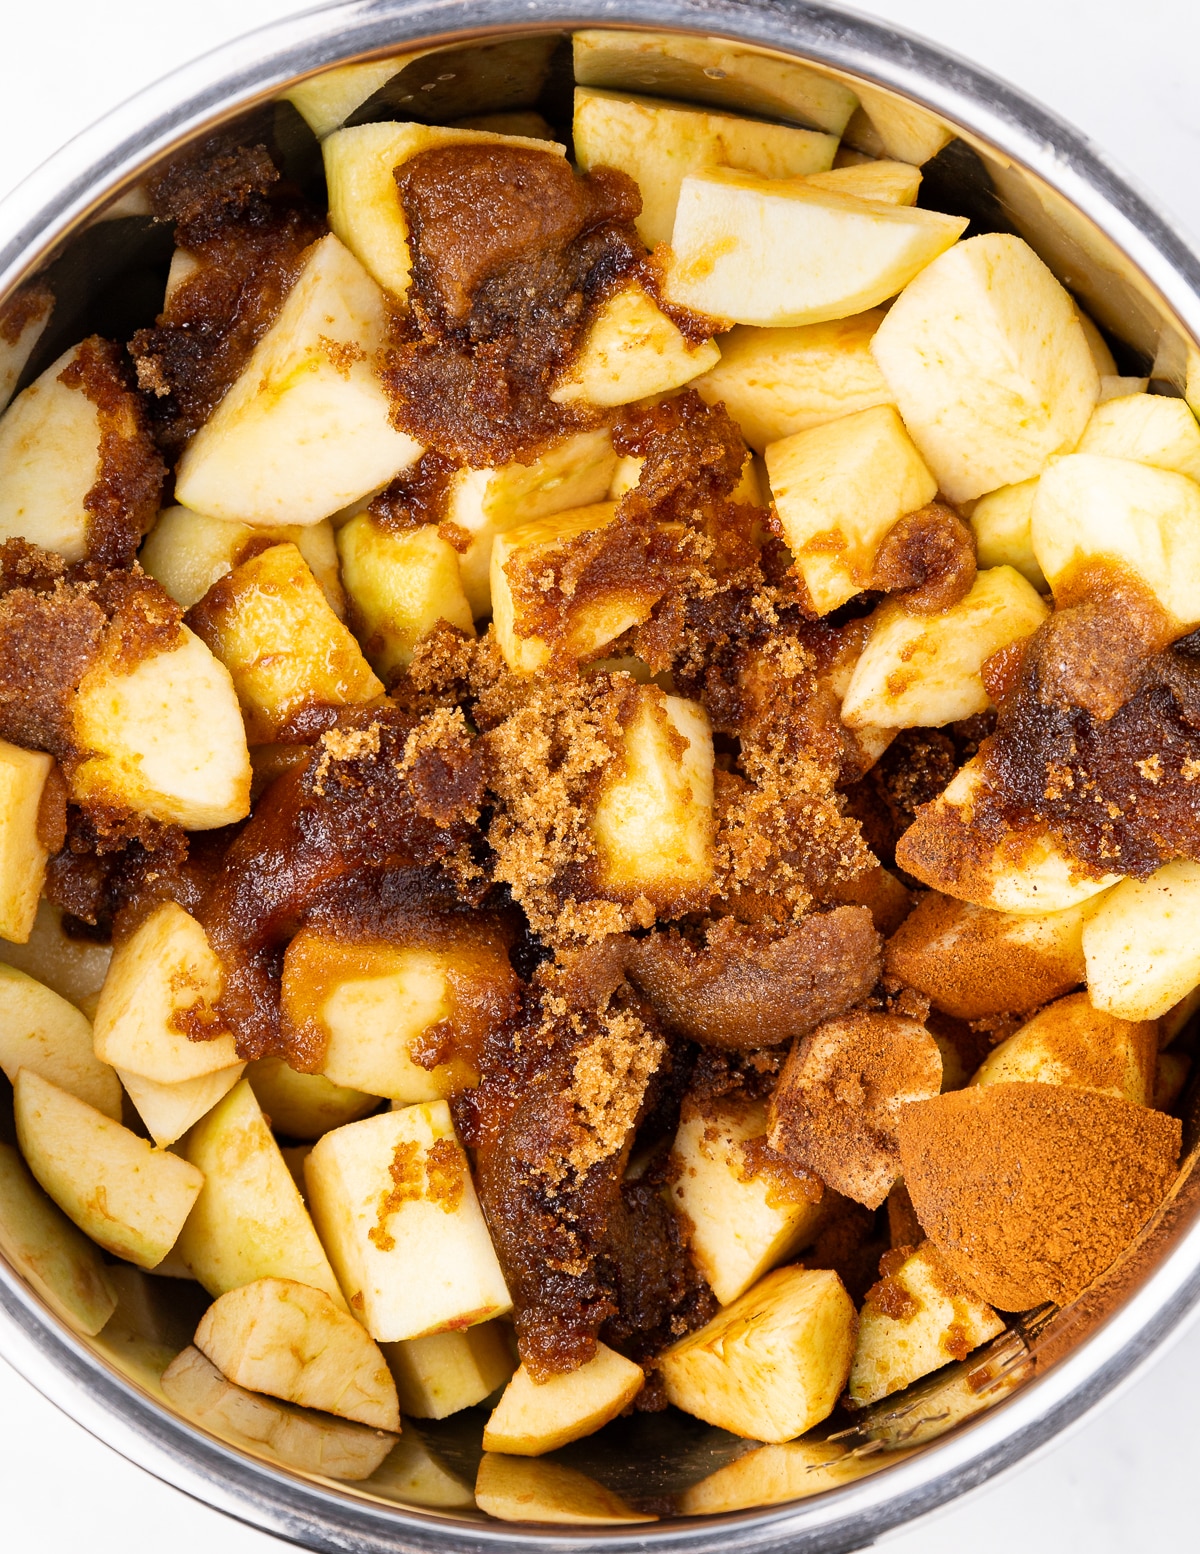 apples, sugar, and spice in a slow cooker